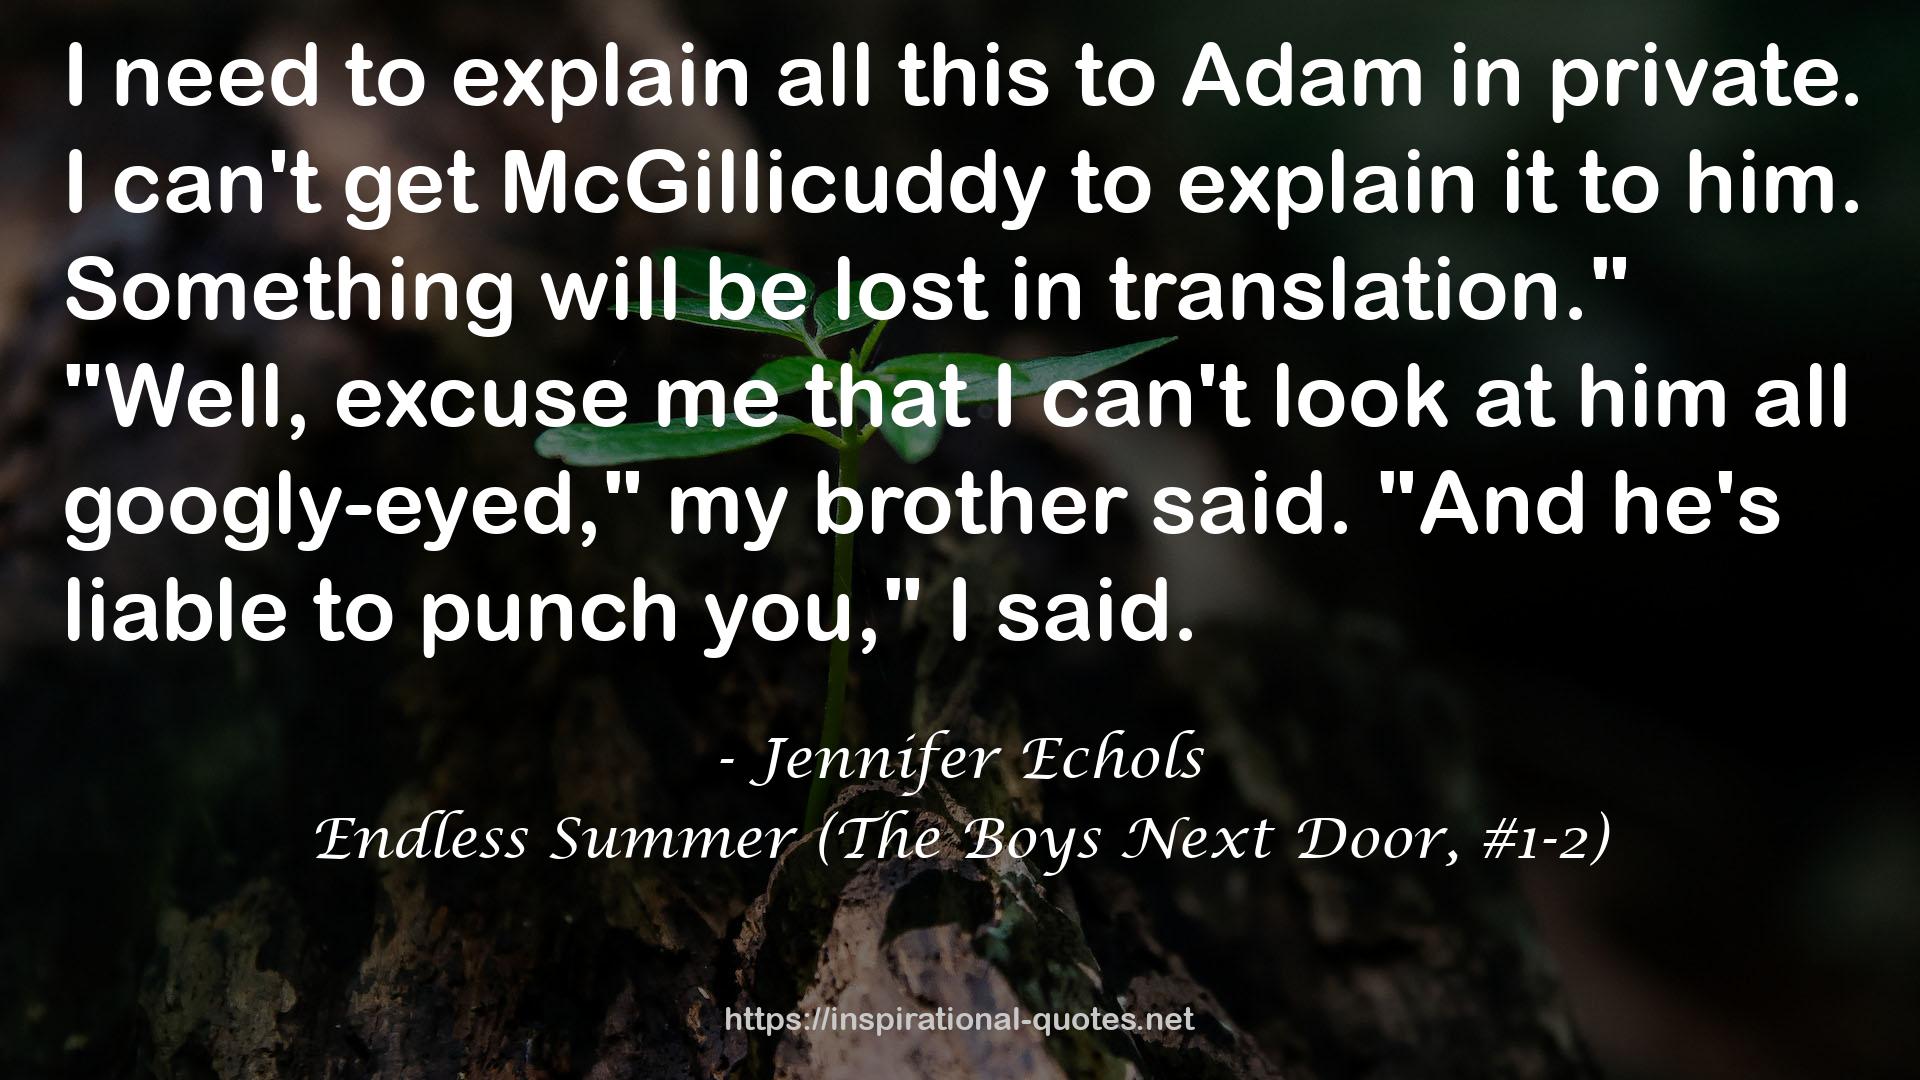 Endless Summer (The Boys Next Door, #1-2) QUOTES